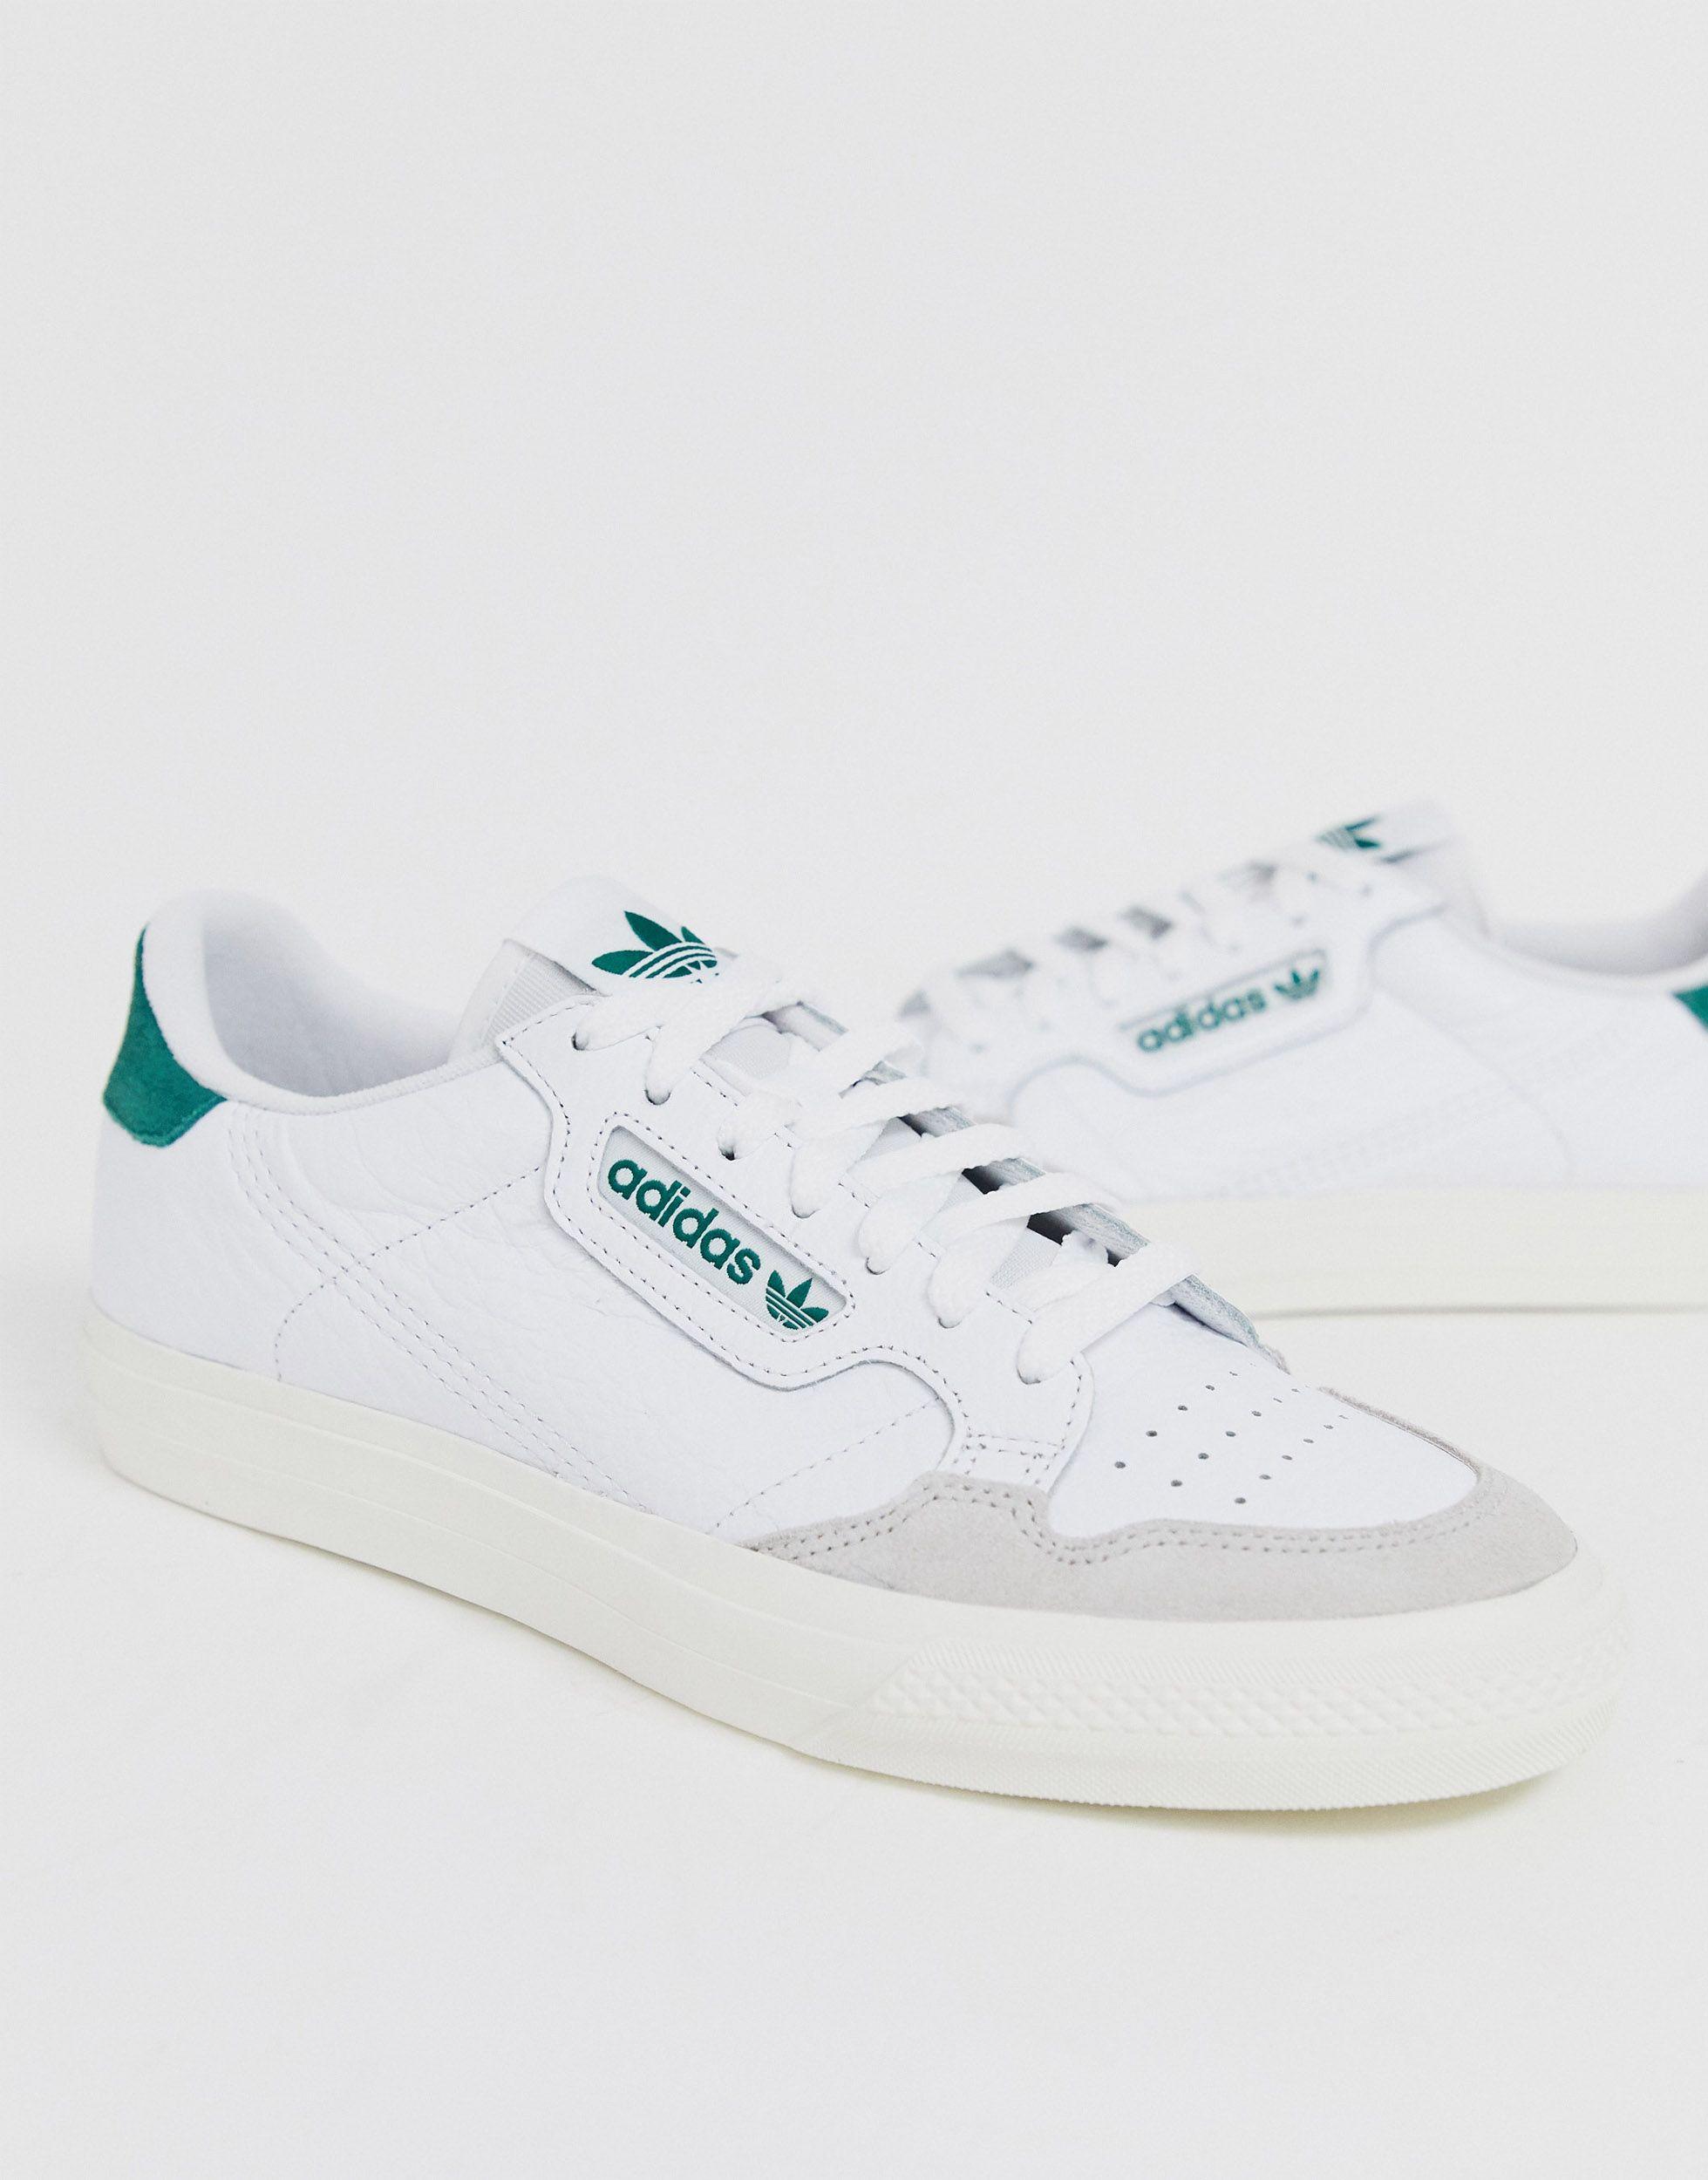 adidas Originals Rubber Continental 80 Vulc Sneakers in White for Men - Lyst